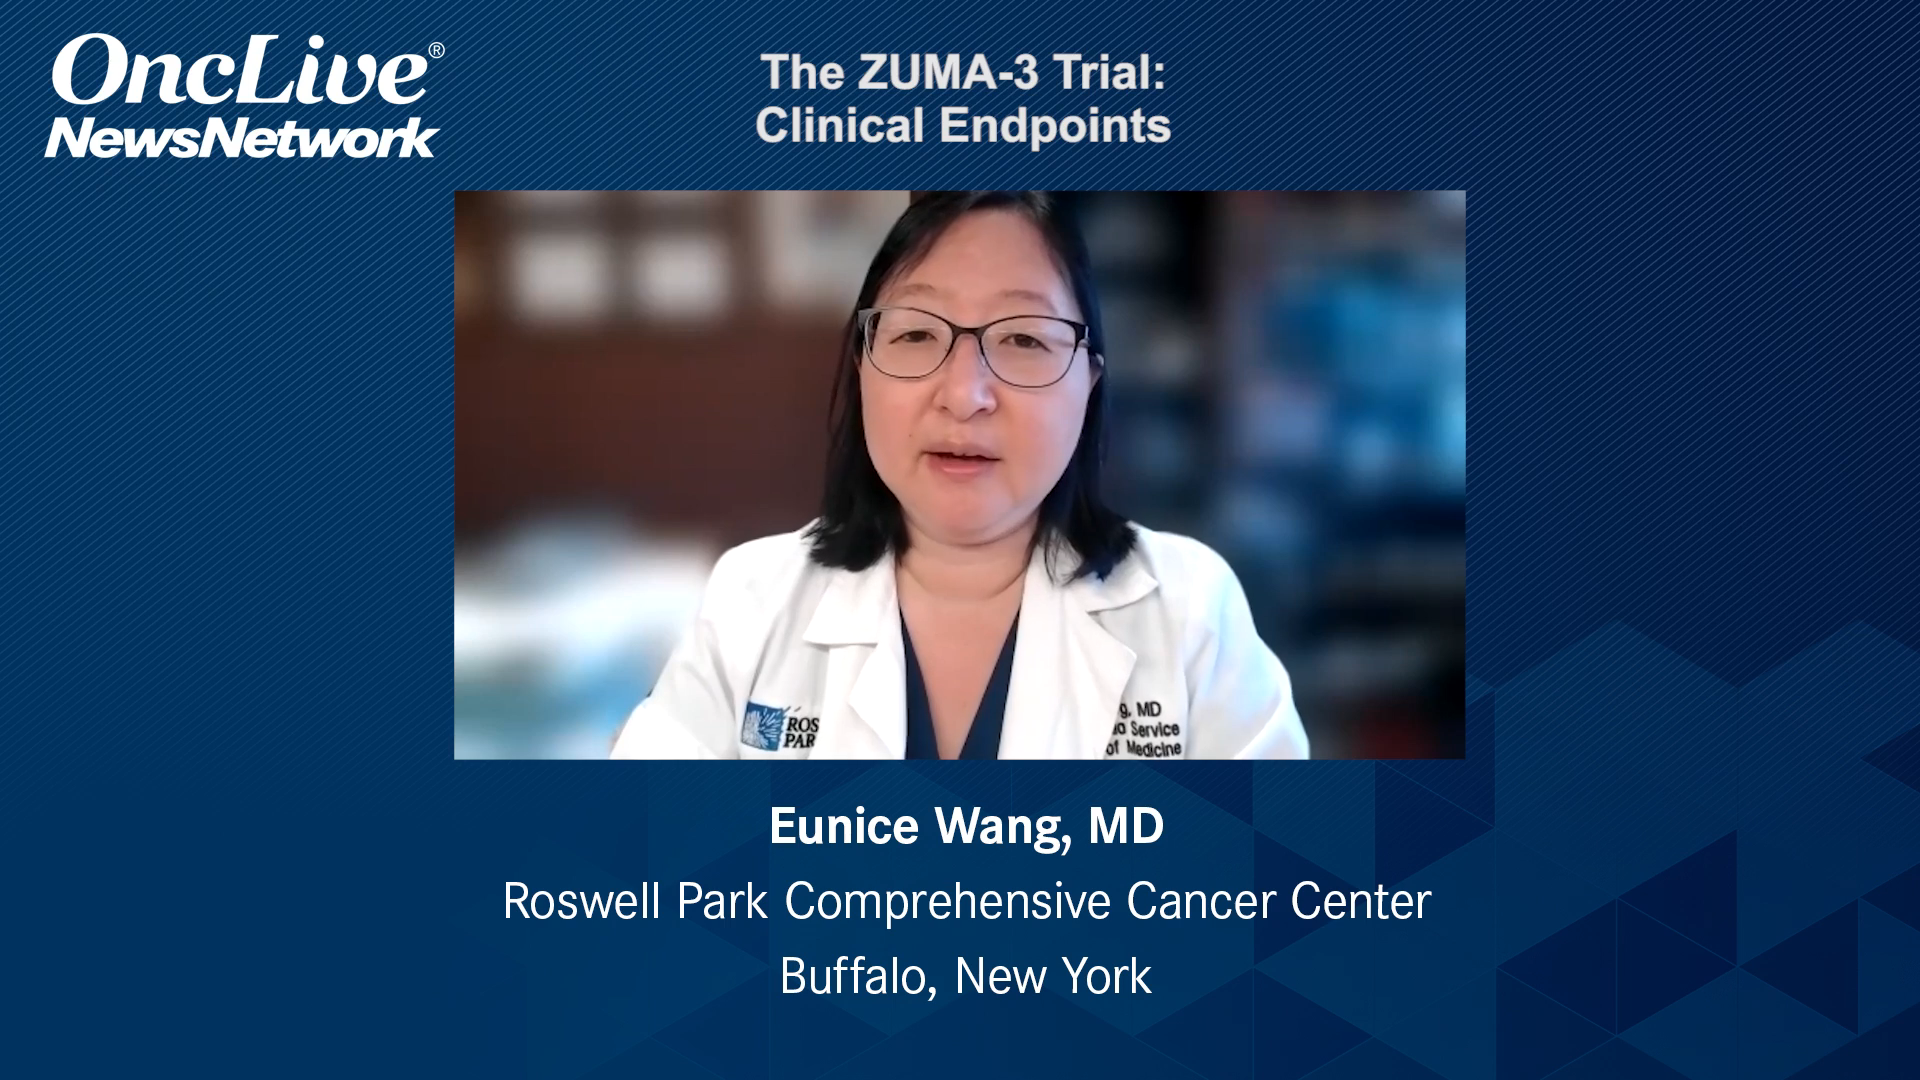 The ZUMA-3 Trial: Clinical Endpoints